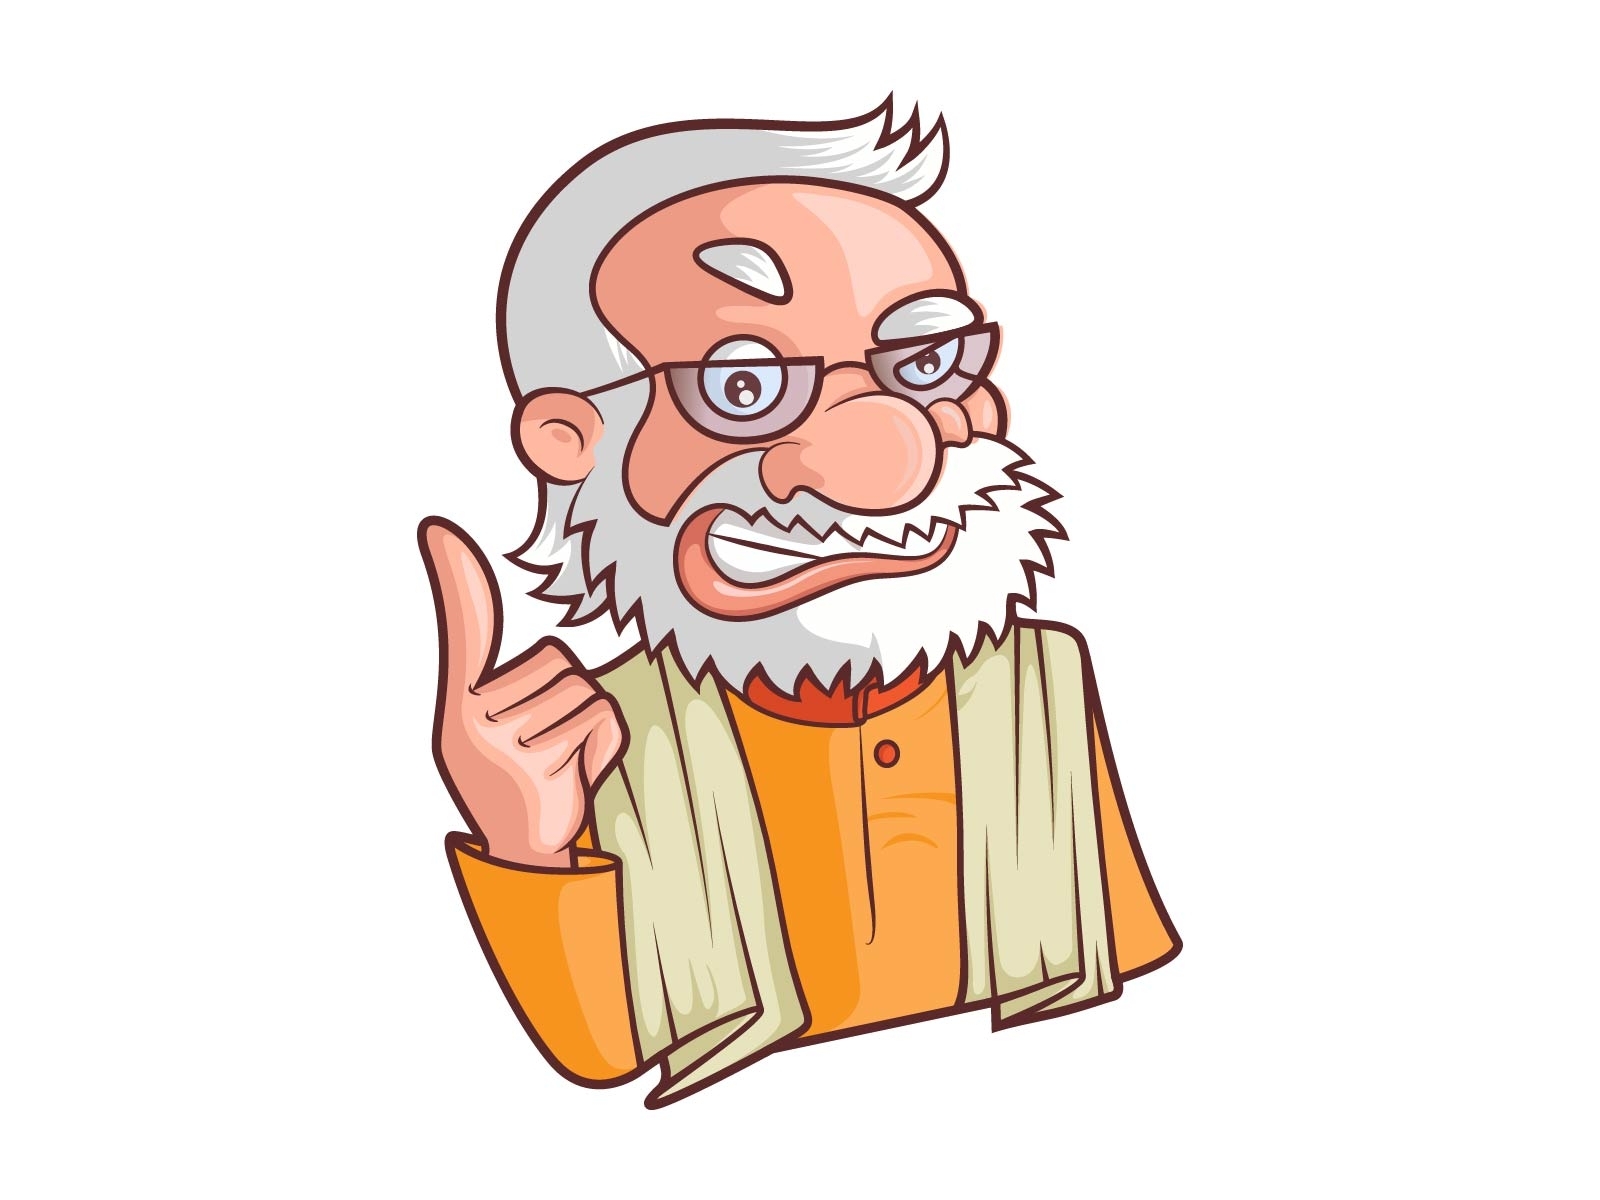 As Modi's Stock Plummets, Cartoonists Have a Field Day